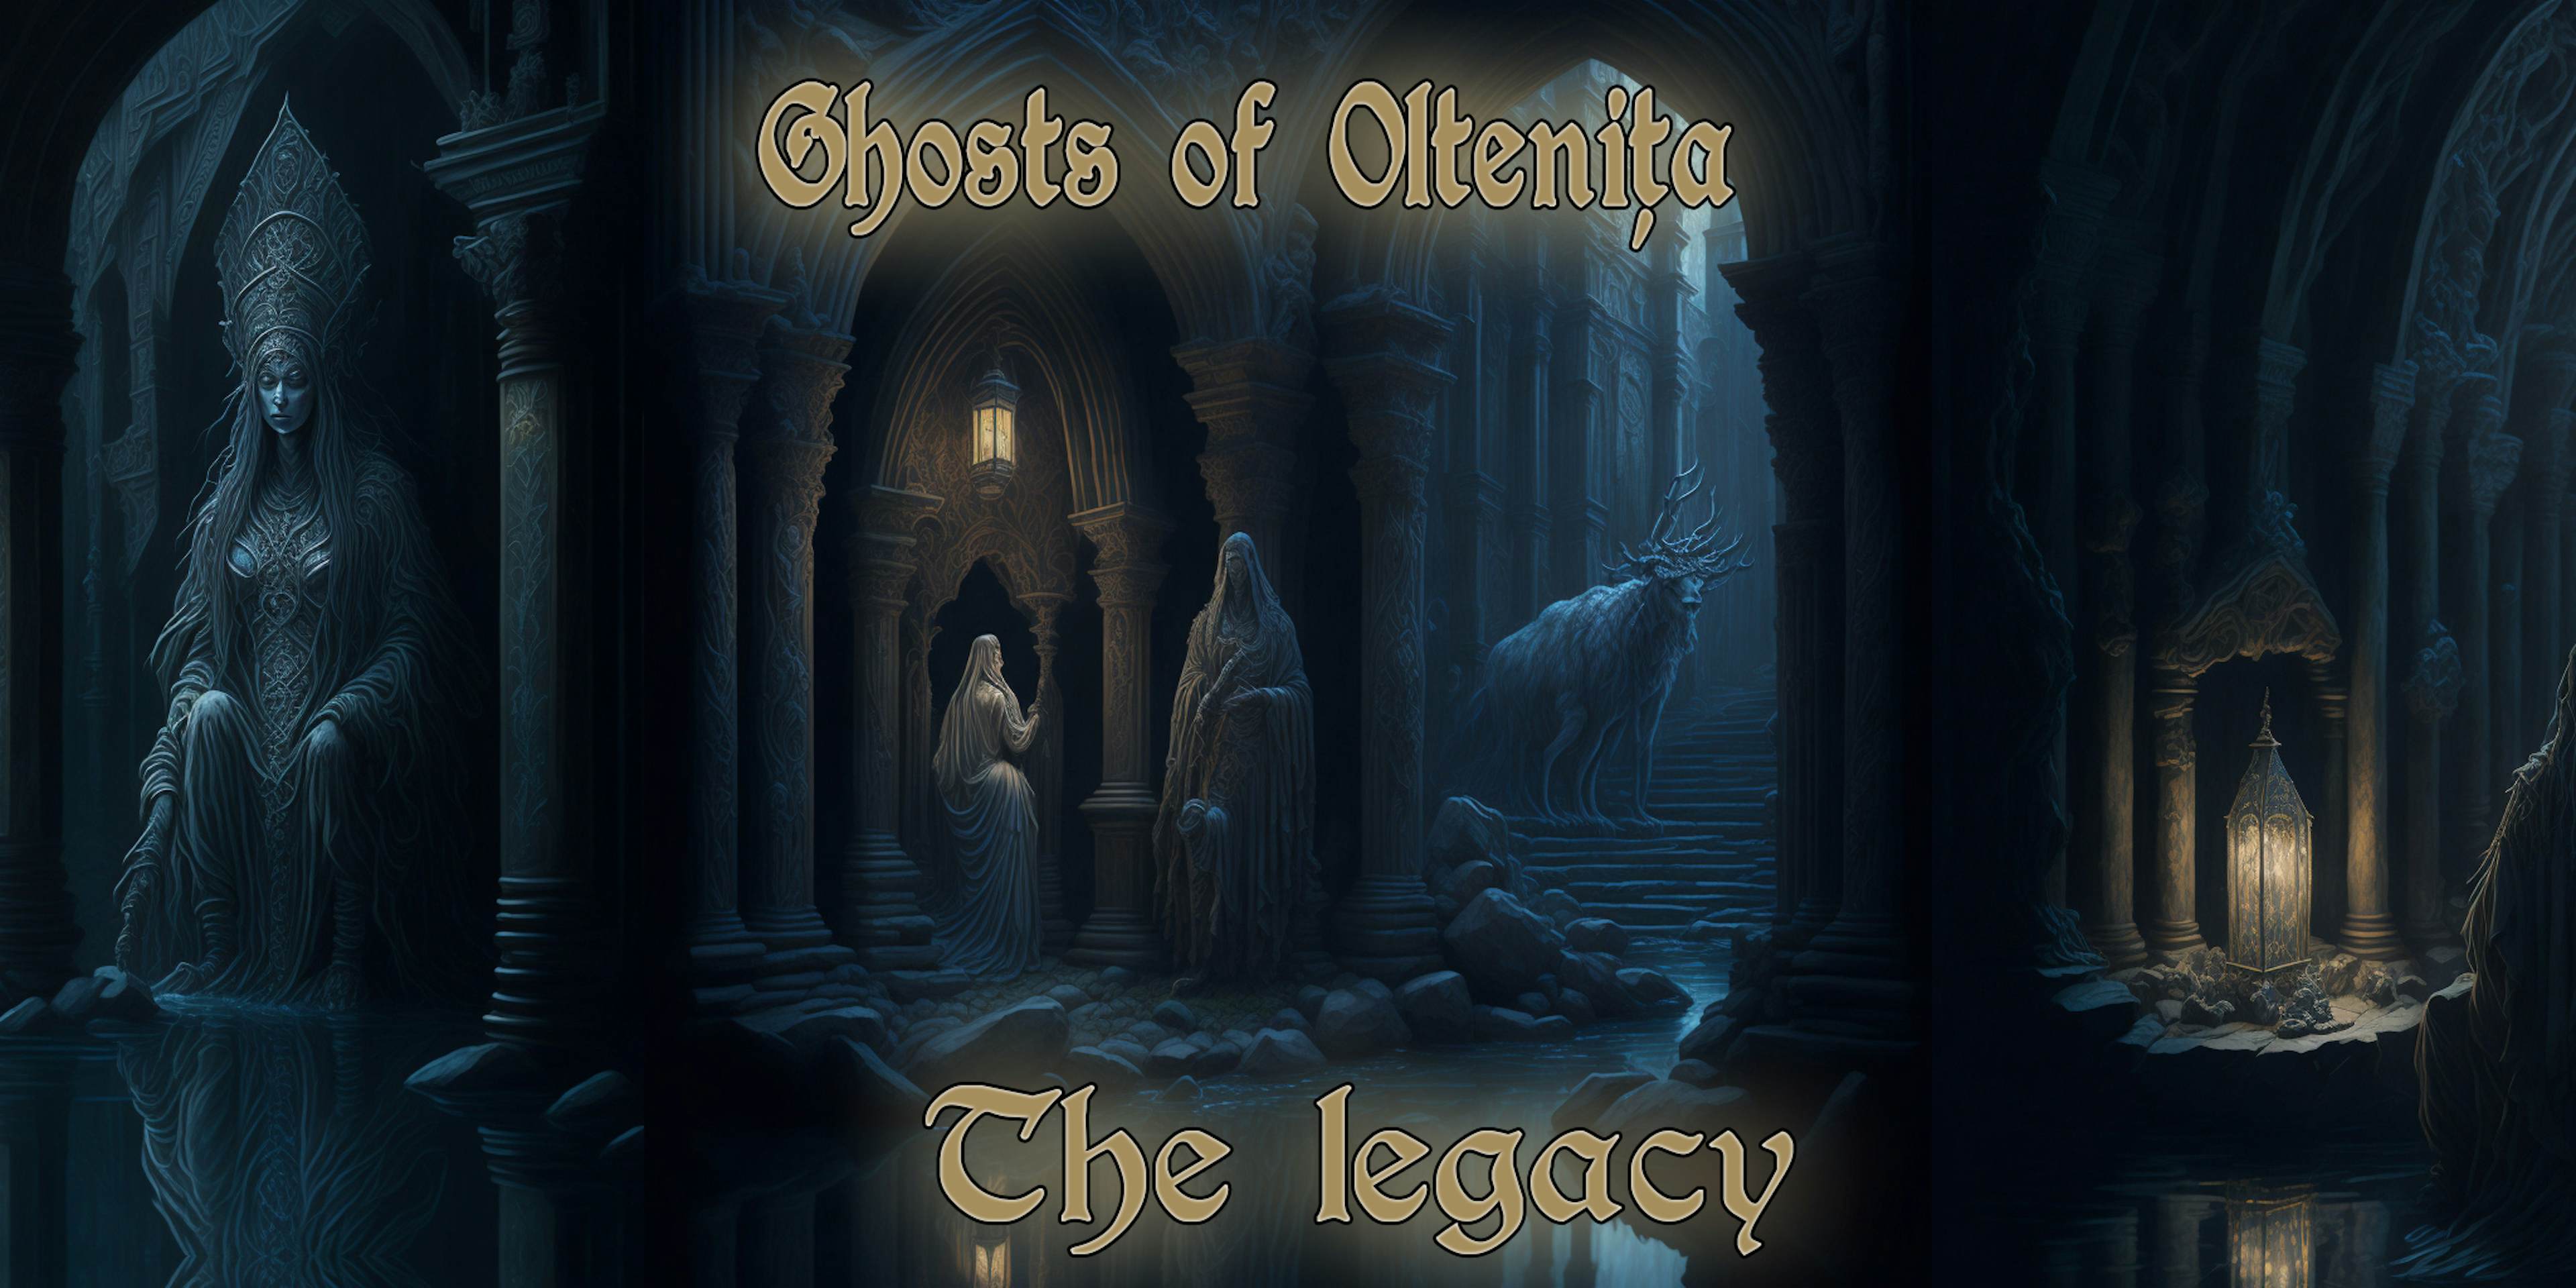 Ghosts of Oltenita - The legacy